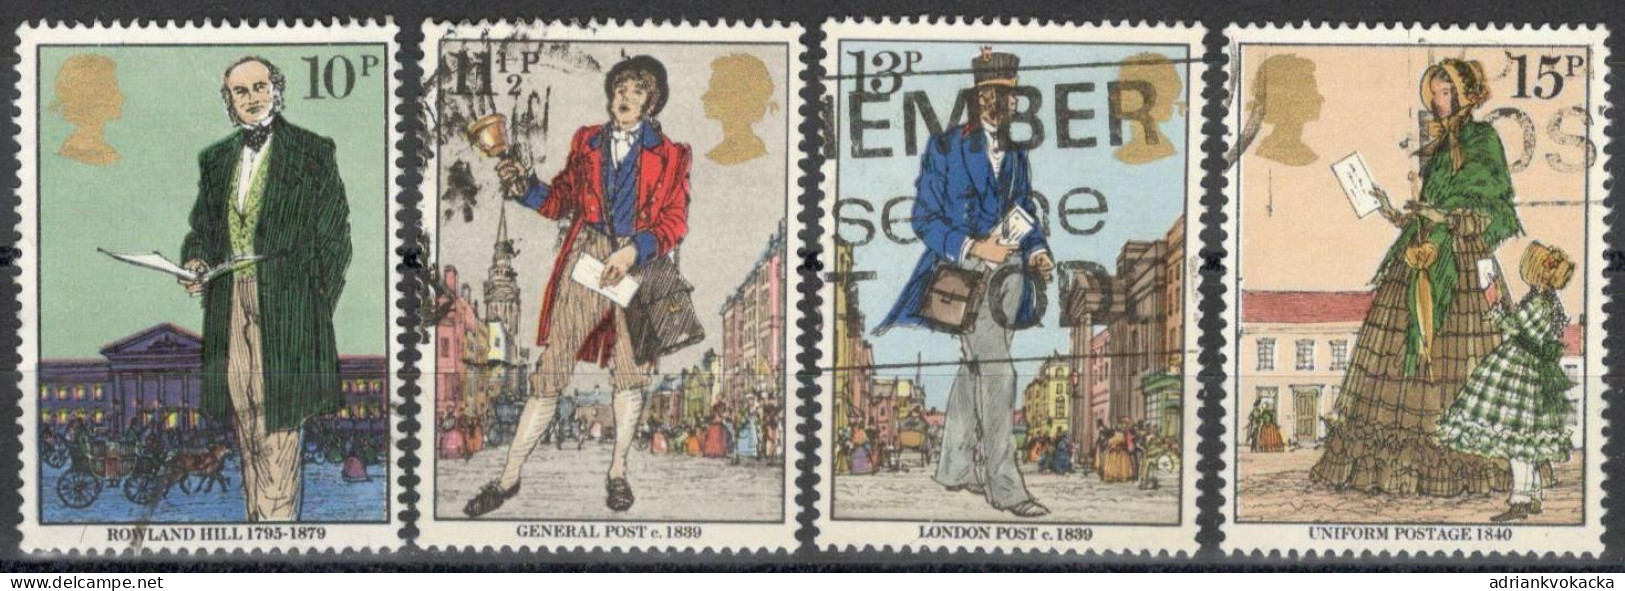 United Kingdom - Centenary Of The Death Of Sir Rowland Hill, Complete Series Of Cancelled Stamps Mi:GB 804-807 (1979) - Used Stamps